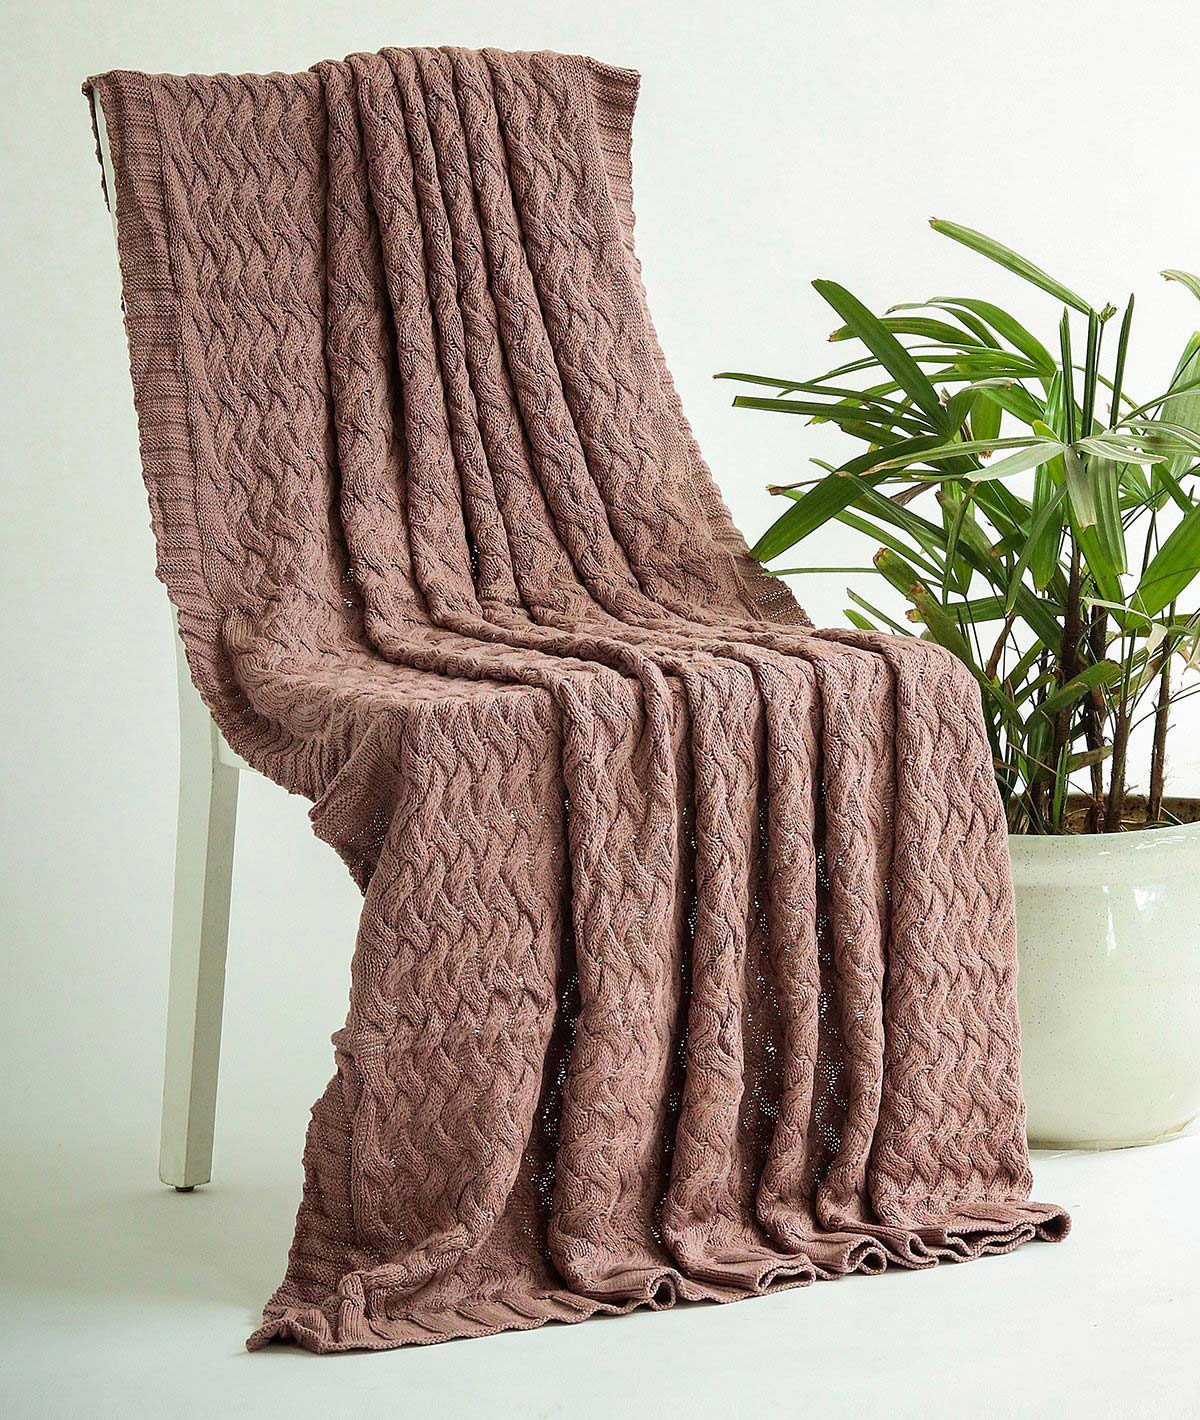 CRISS CROSS - Pewter Color 100% Cotton Knitted All Season AC Throw Blanket